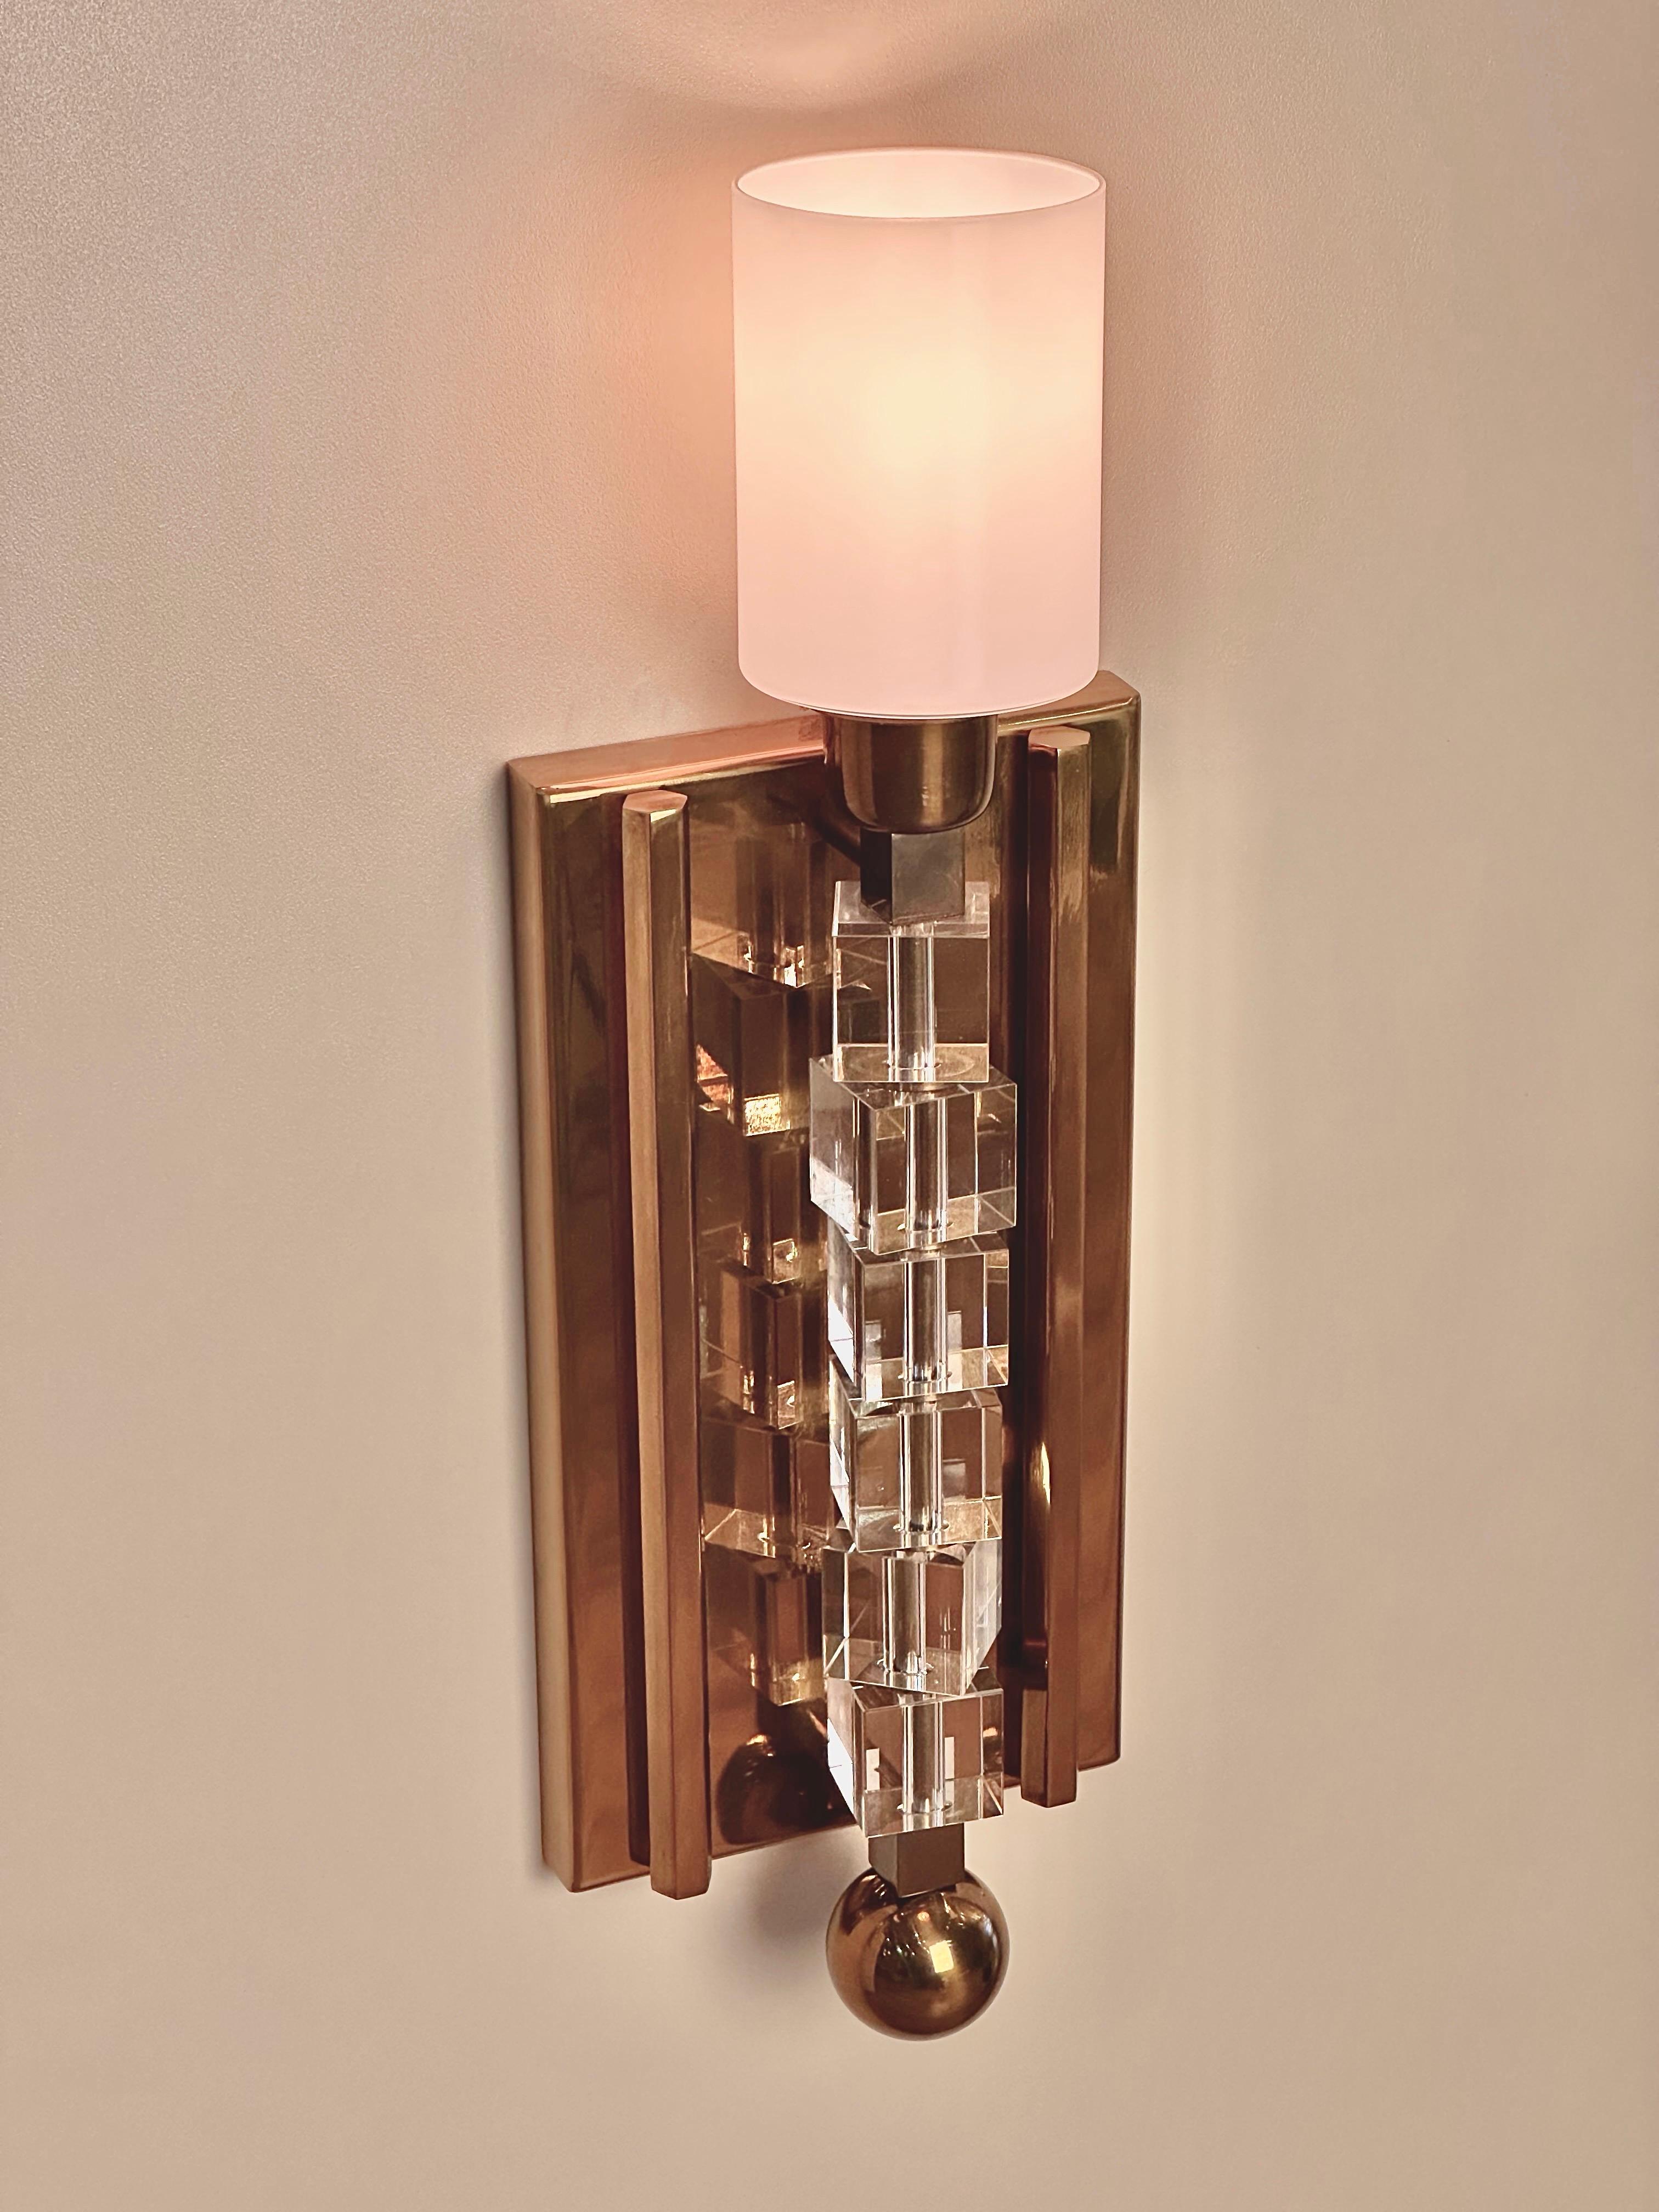 Welded Tortona Brass Lampshade Wall Sconce Mid-Century Modern Lighting For Sale